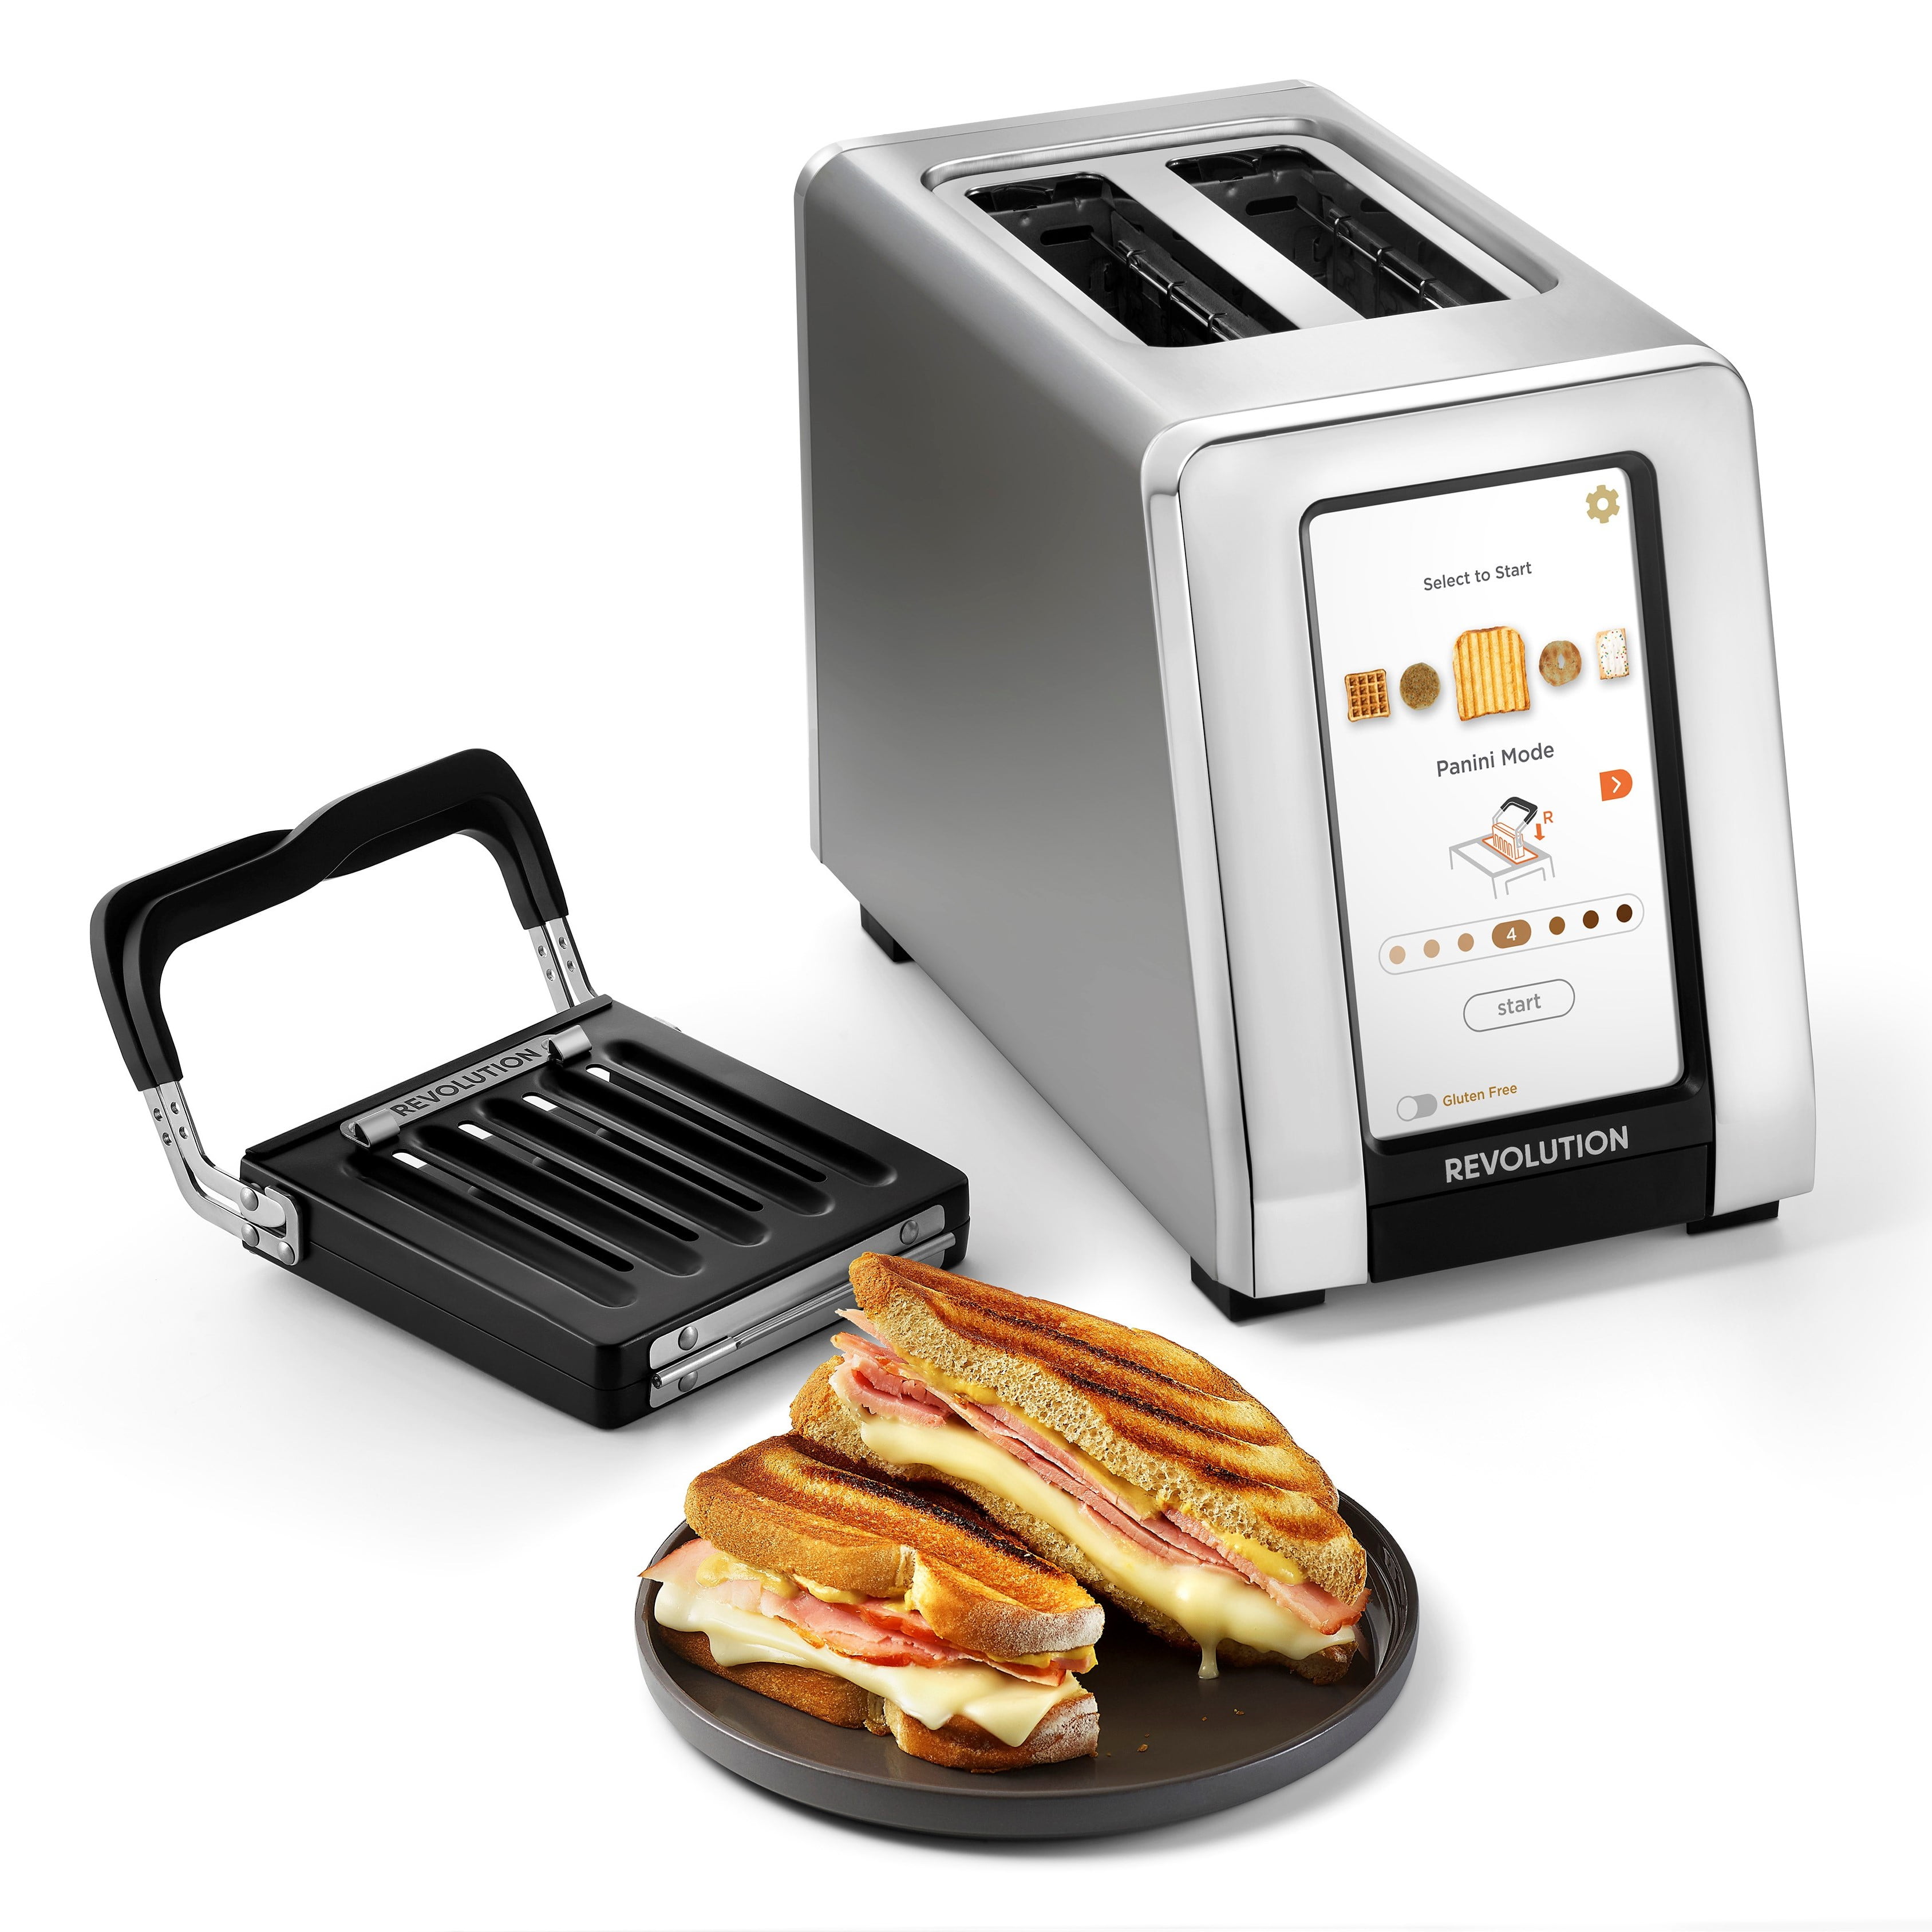 See The Revolution Panini Press In Action 